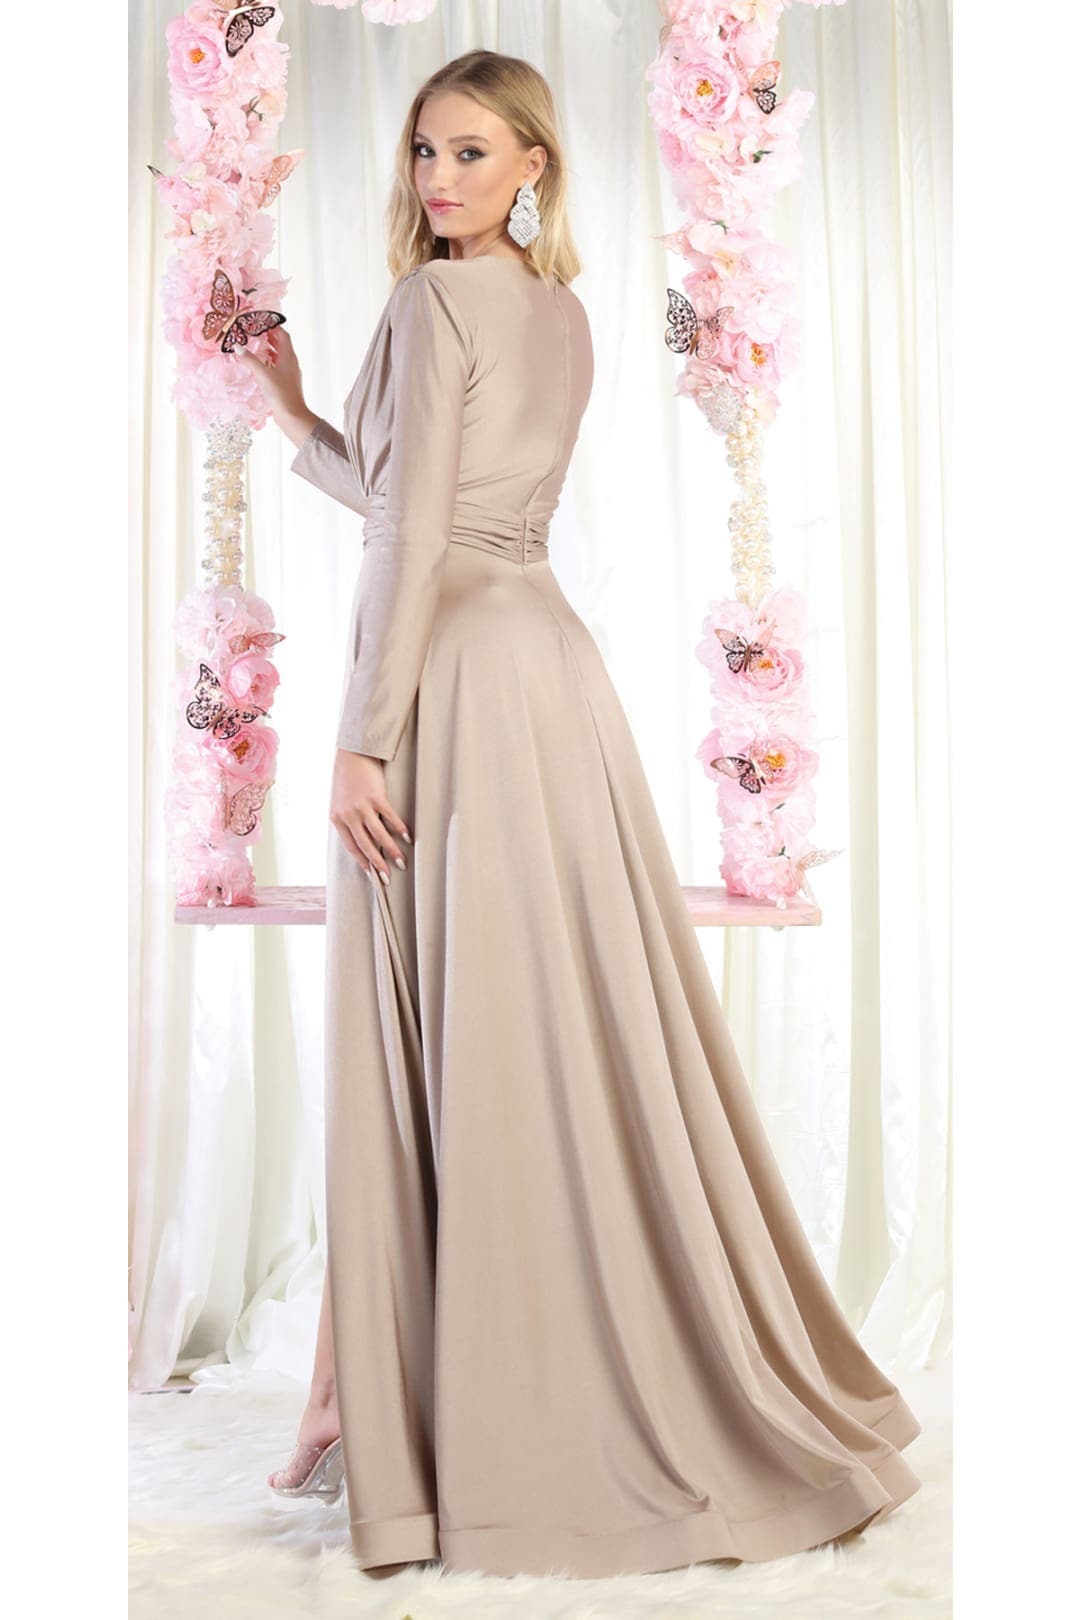 Stretchy Formal Evening Gown